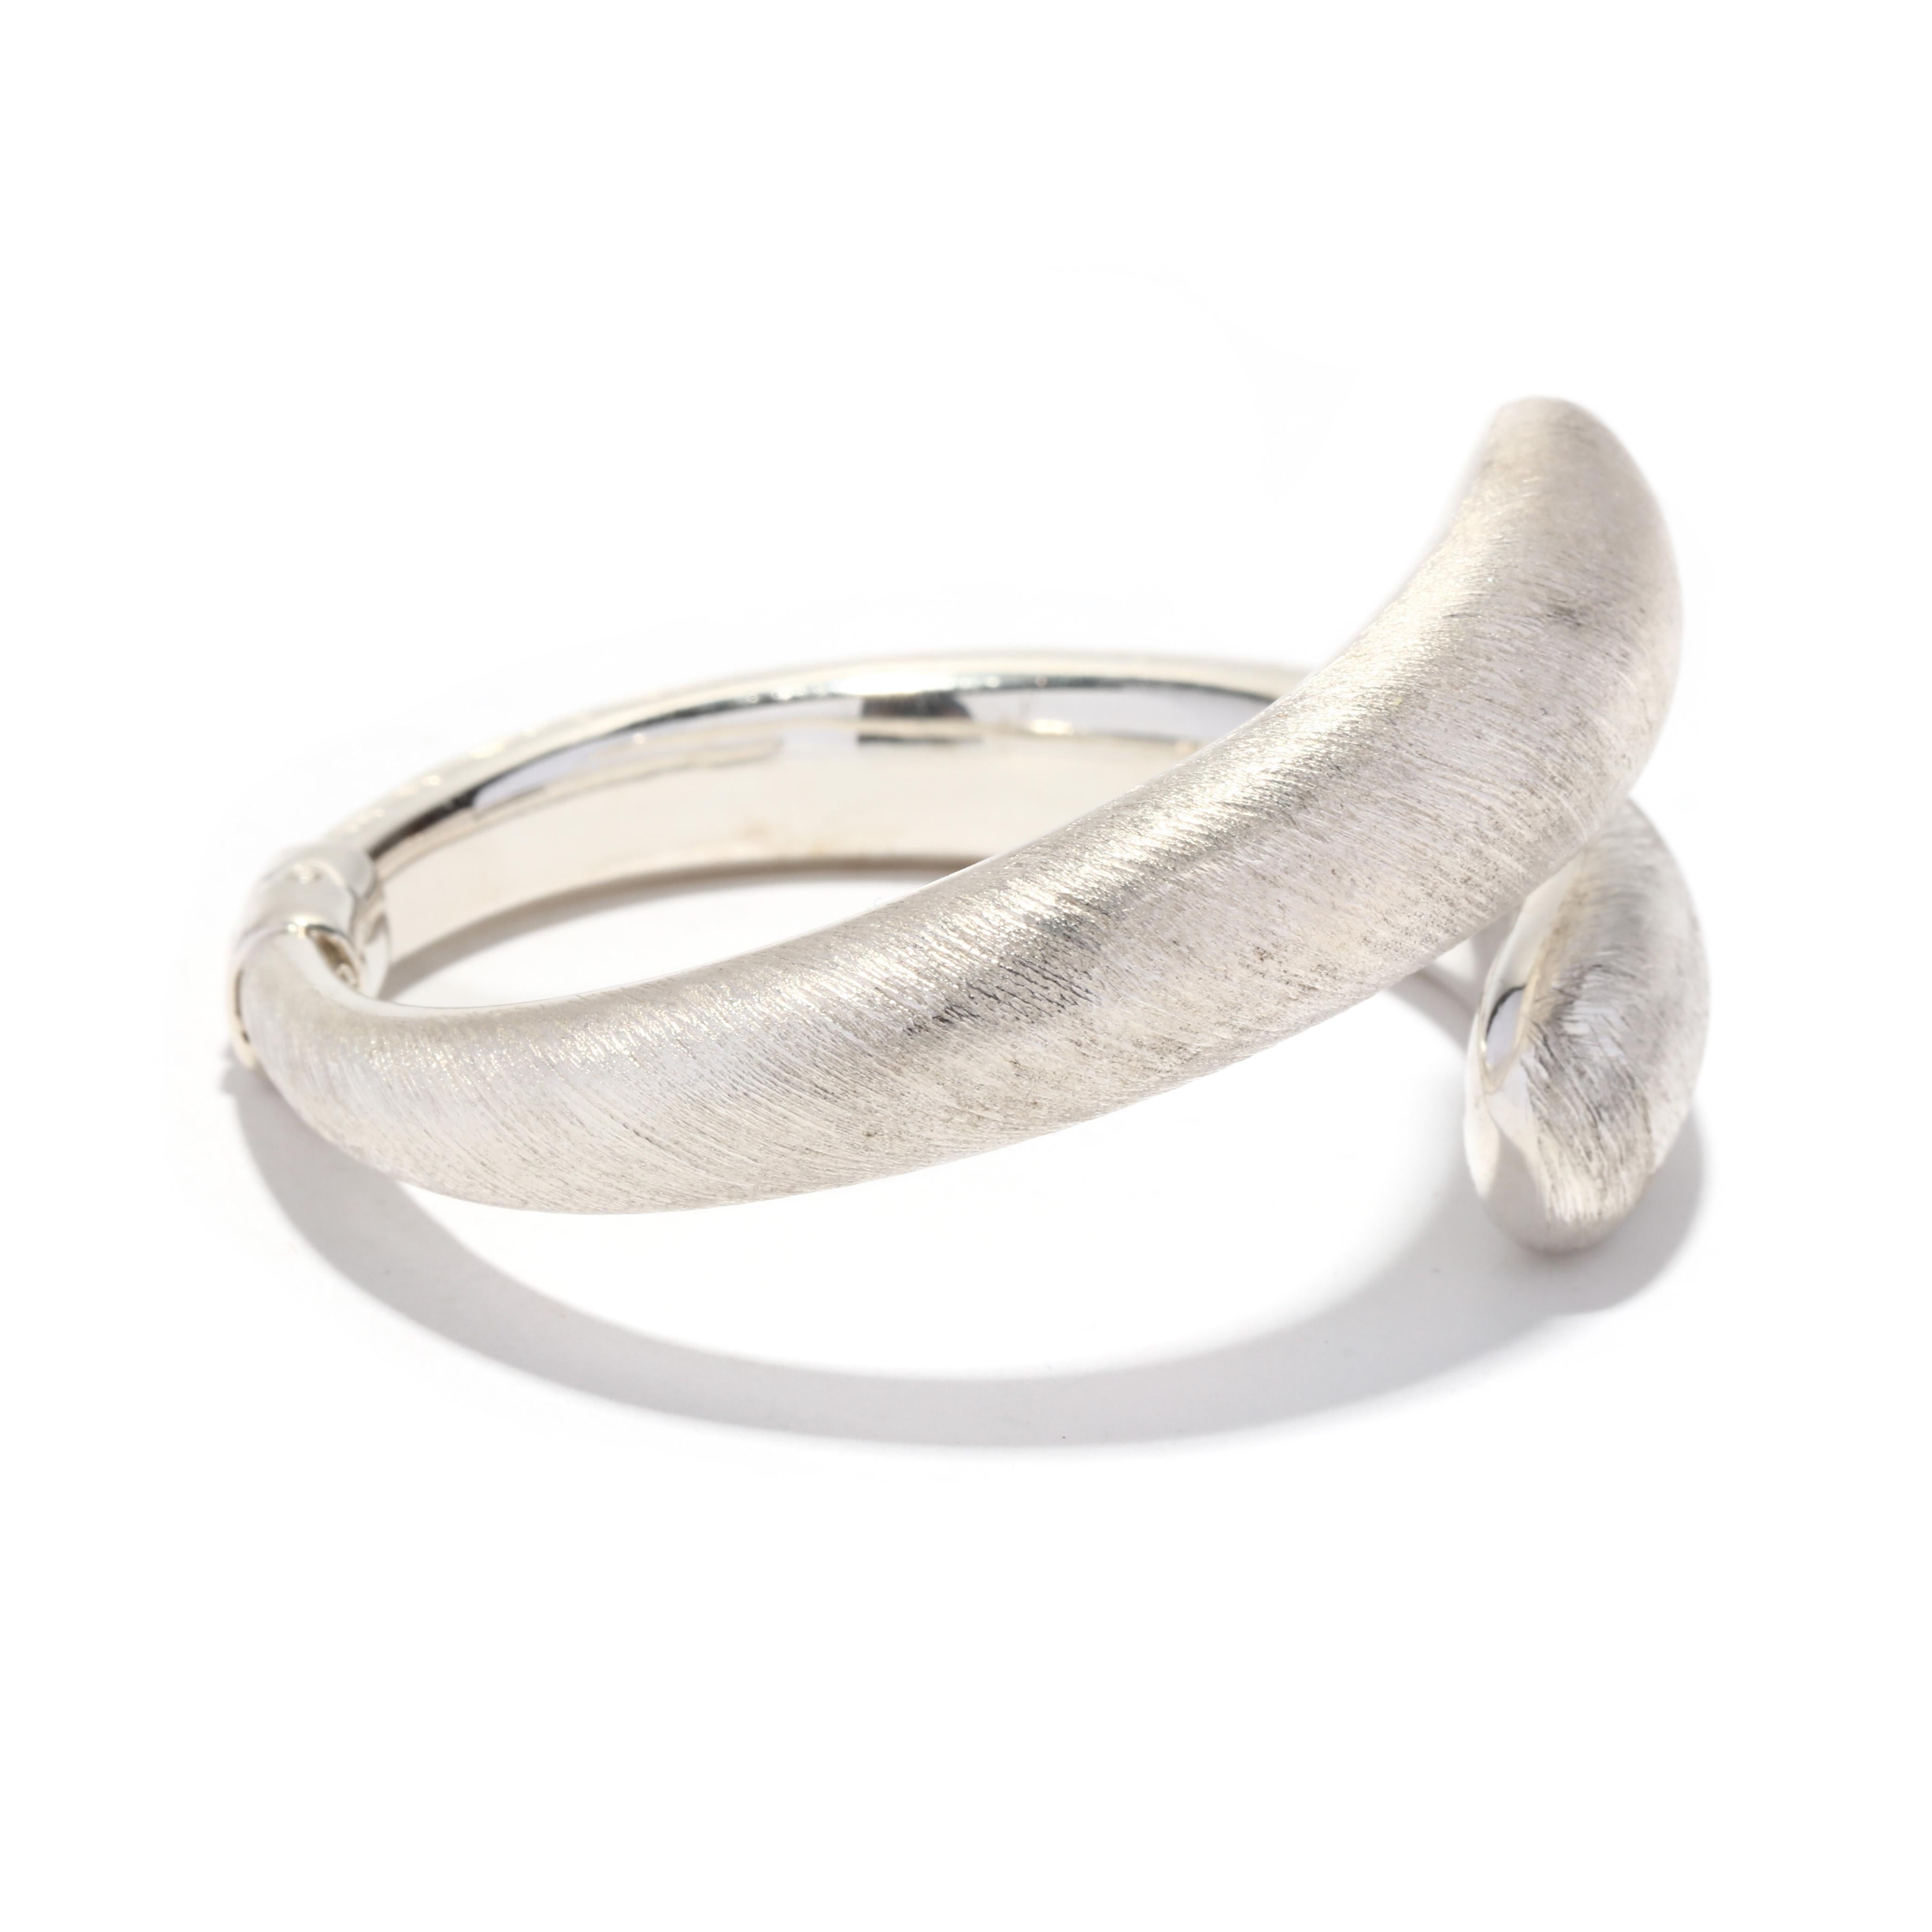 This handmade Italian sterling silver crossover bangle is truly unique. Featuring a textured design, this stunning bracelet is perfect for a special occasion or everyday wear. The bracelet measures 6.5 inches and is crafted from 925 Italian sterling